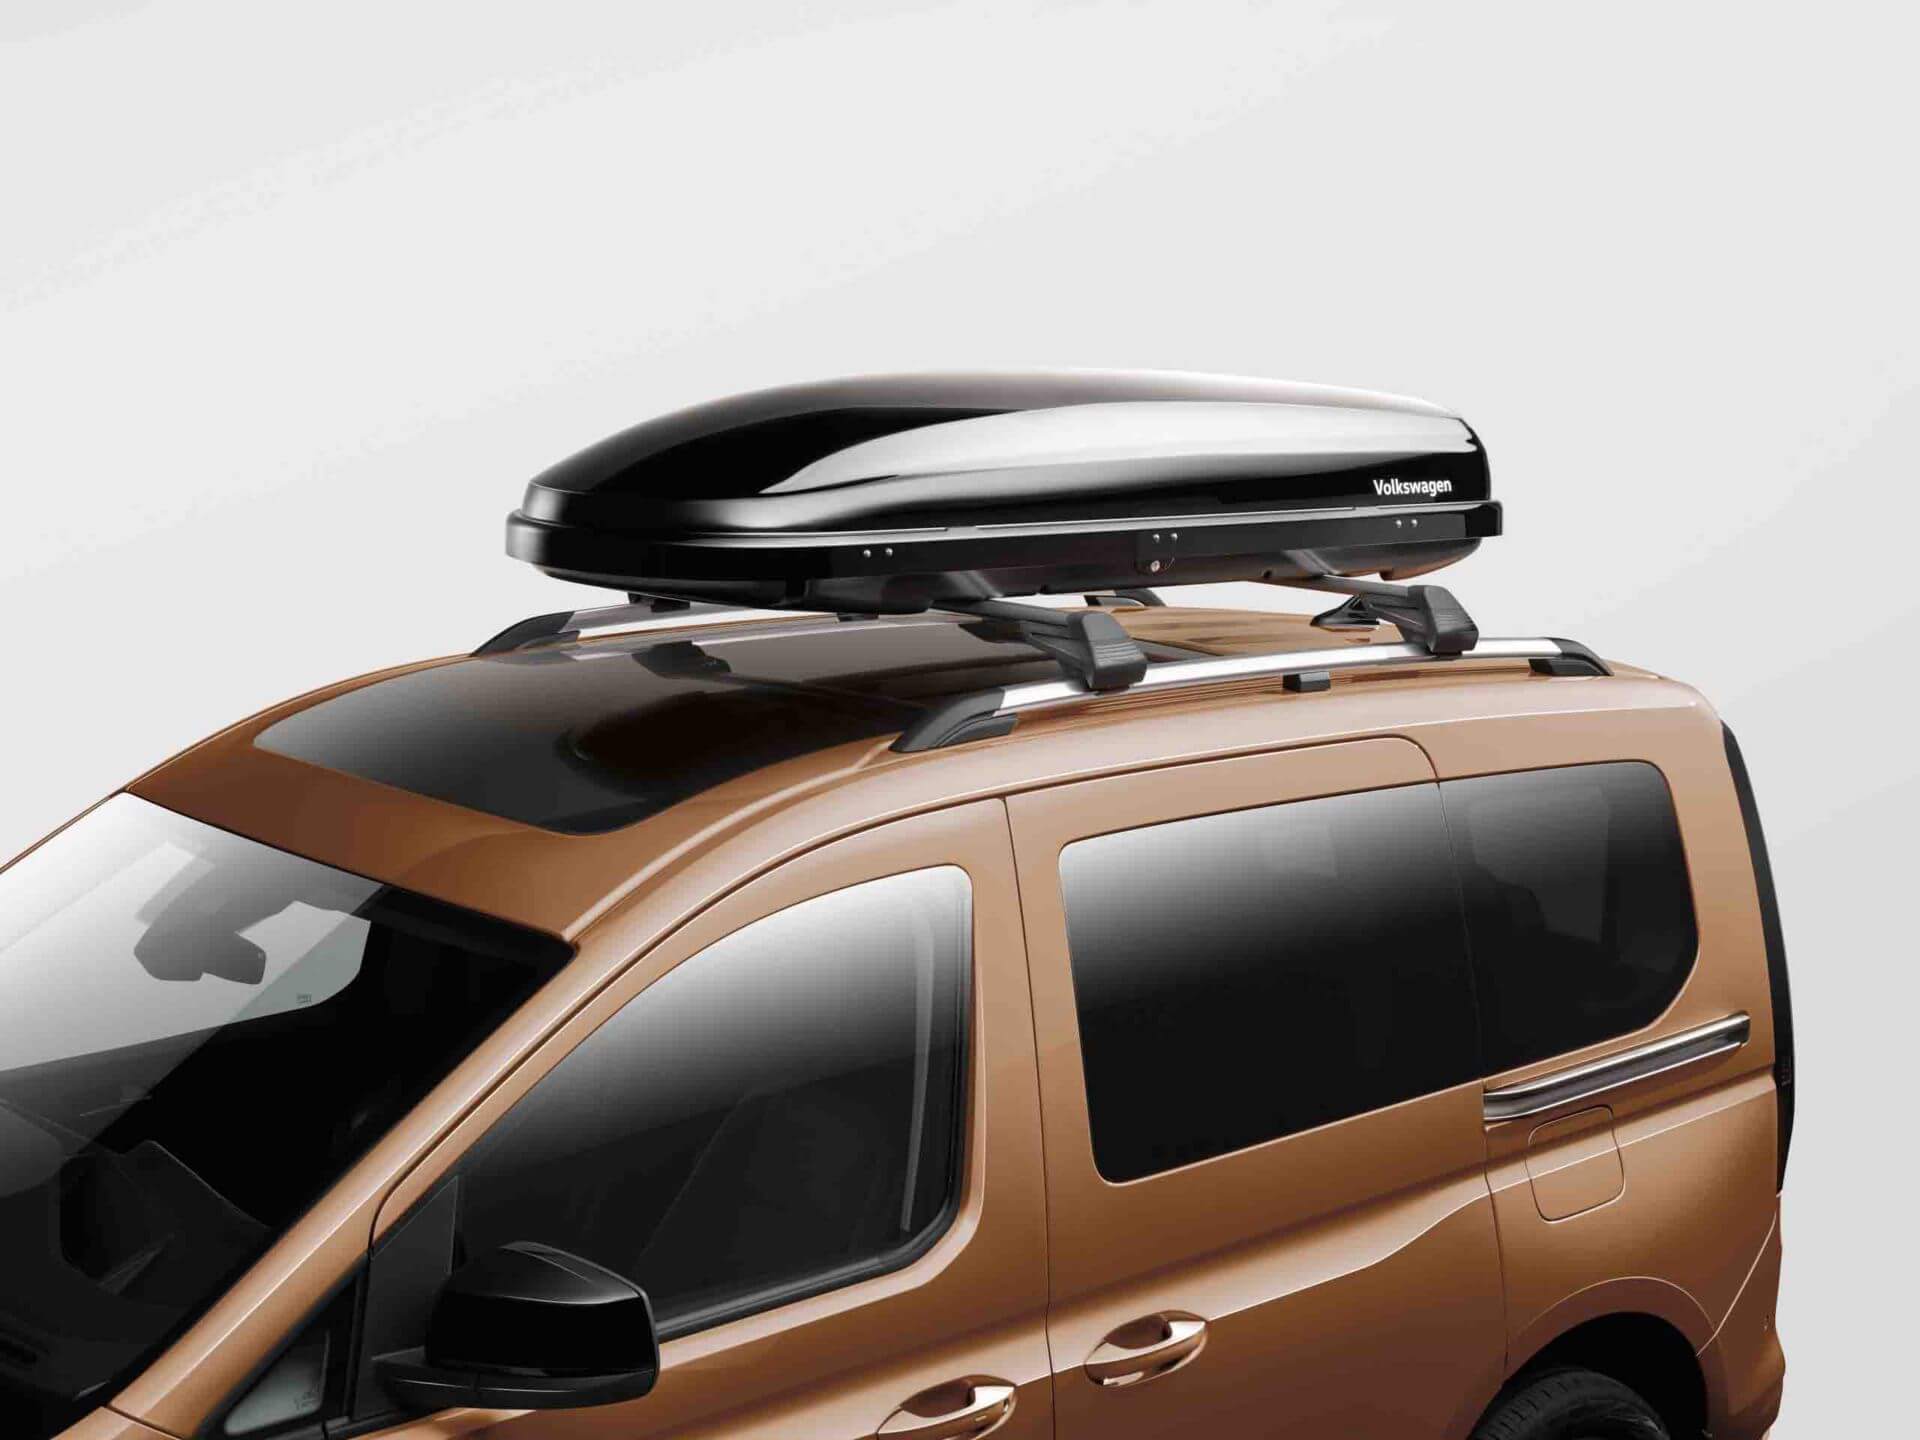 Roof box (340L and 460L capacities)